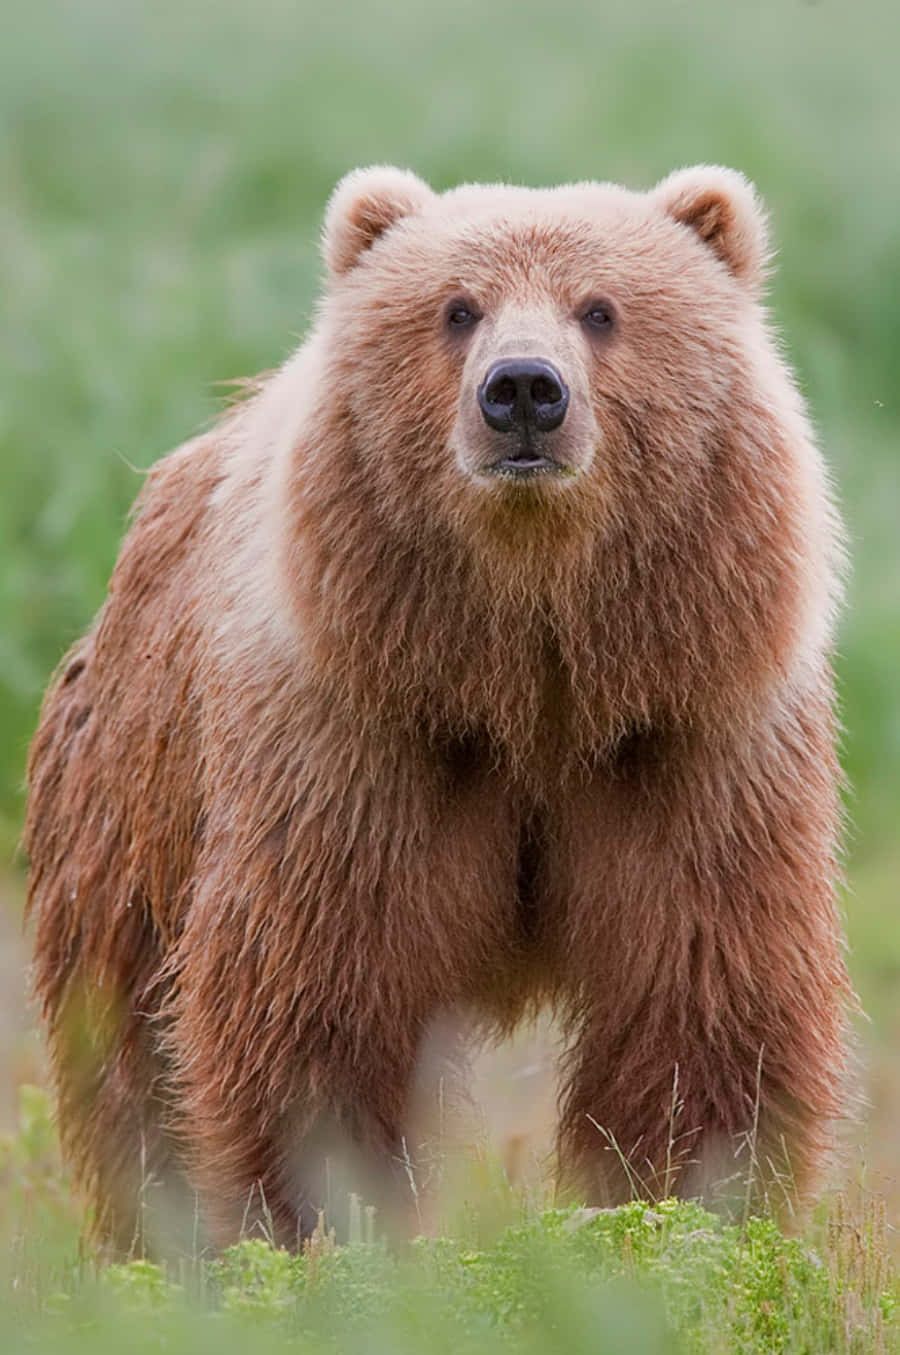 A brown bear standing in a vibrant green field of grass